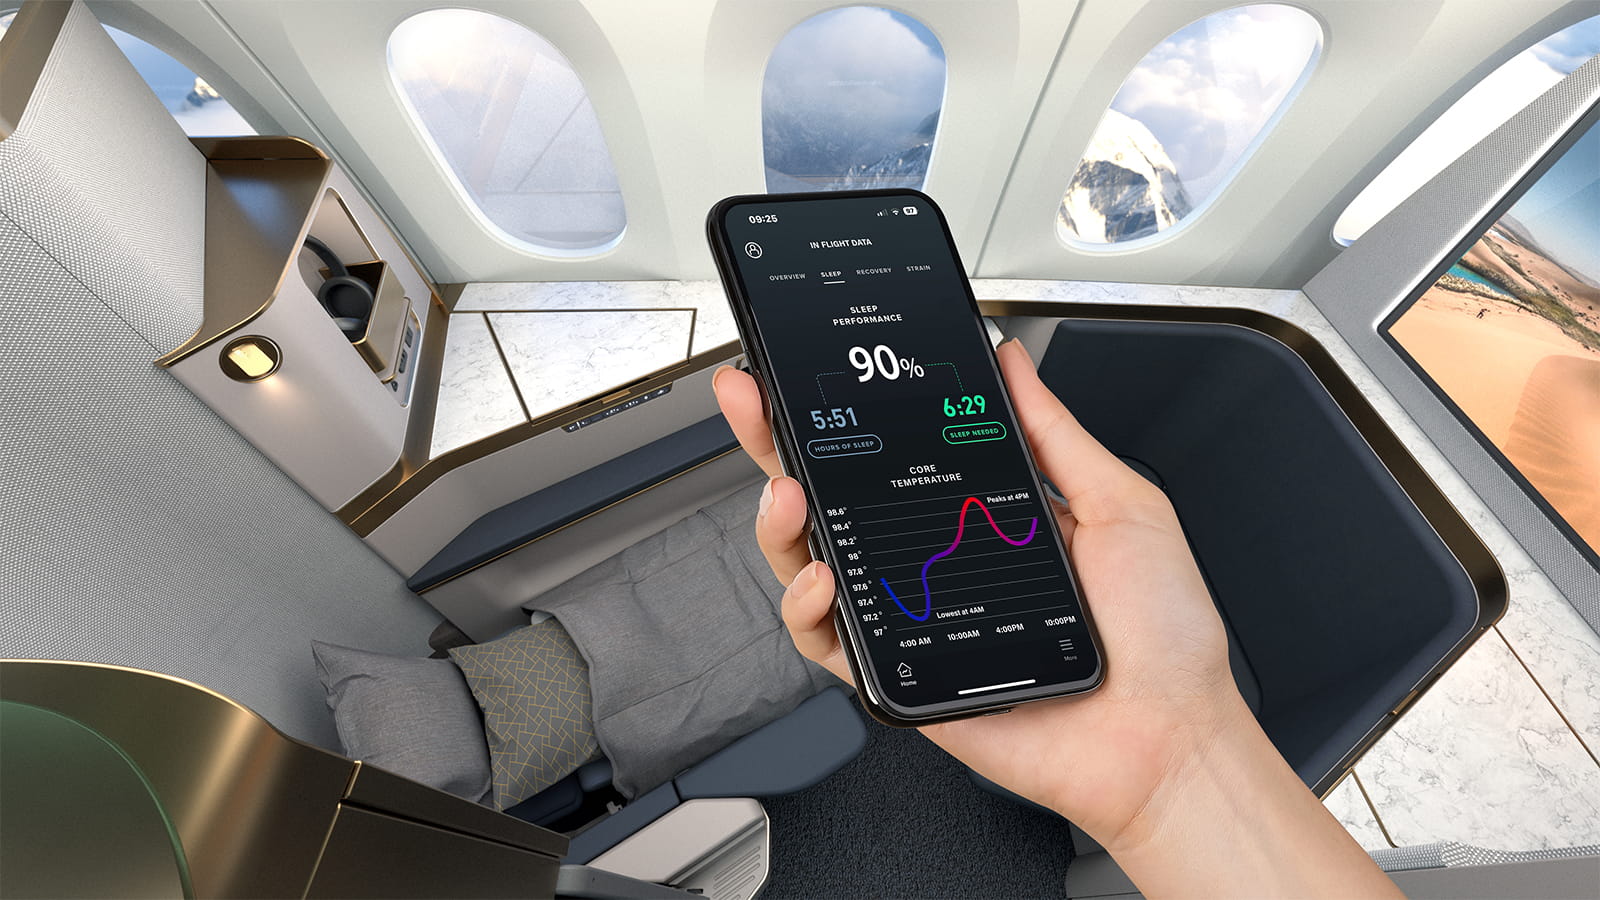 The advanced design and integrated sensor technology within the ARISE™ intelligent comfort system mitigate the primary sleep disturbances during flight – heat regulation, pressure distribution and vibration.